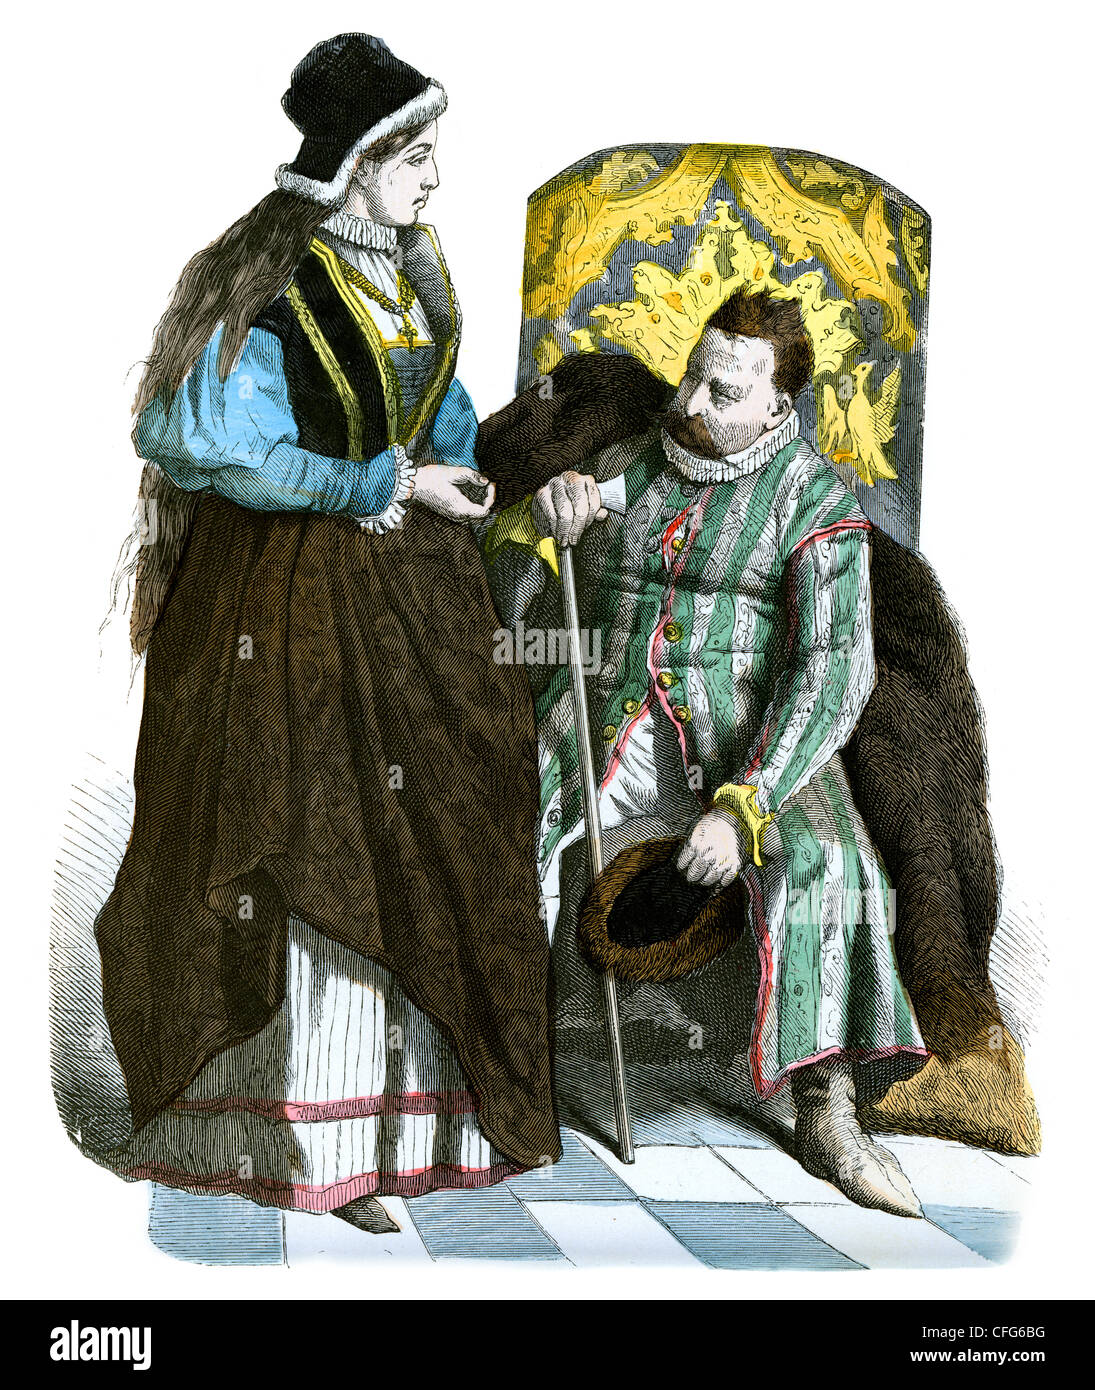 Polish lady and noble man in national dress from the 16th Century Stock Photo